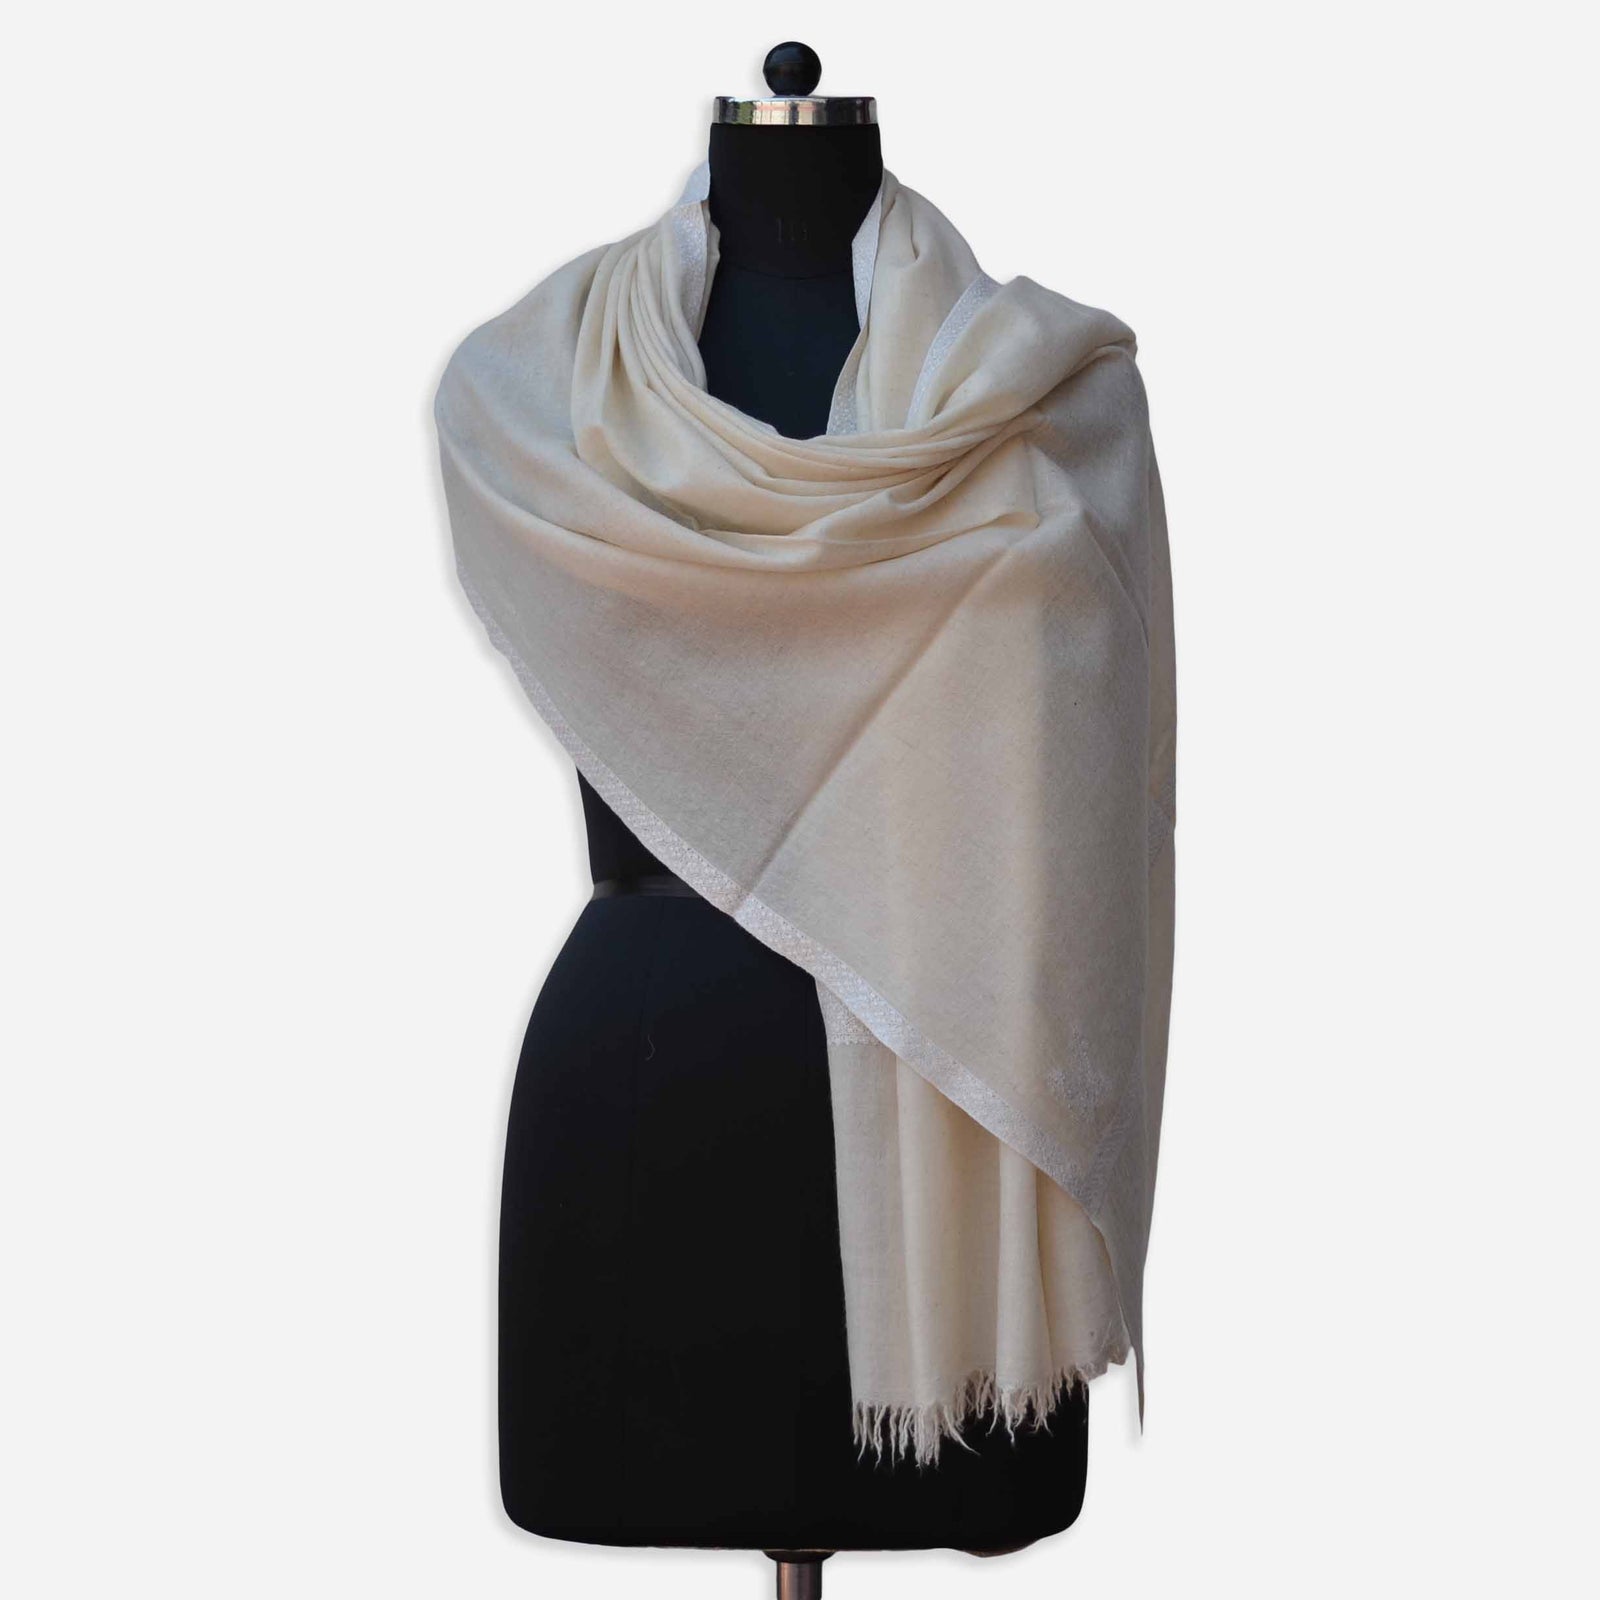 hand woven and hand embroidered cashmere pashmina shawl